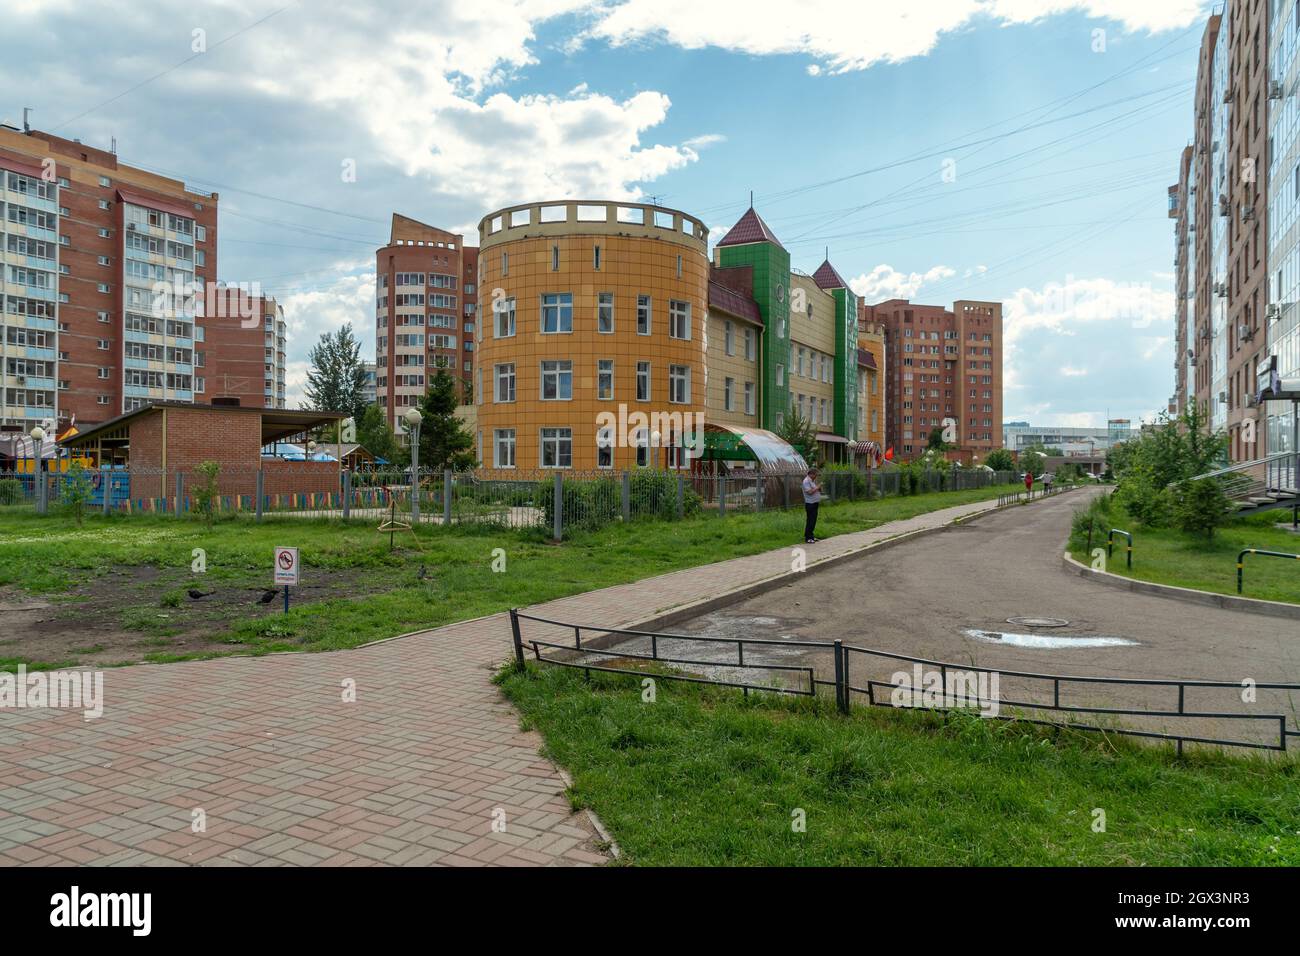 The kindergarten building stands in the neighborhood between residential buildings on a summer day. Stock Photo